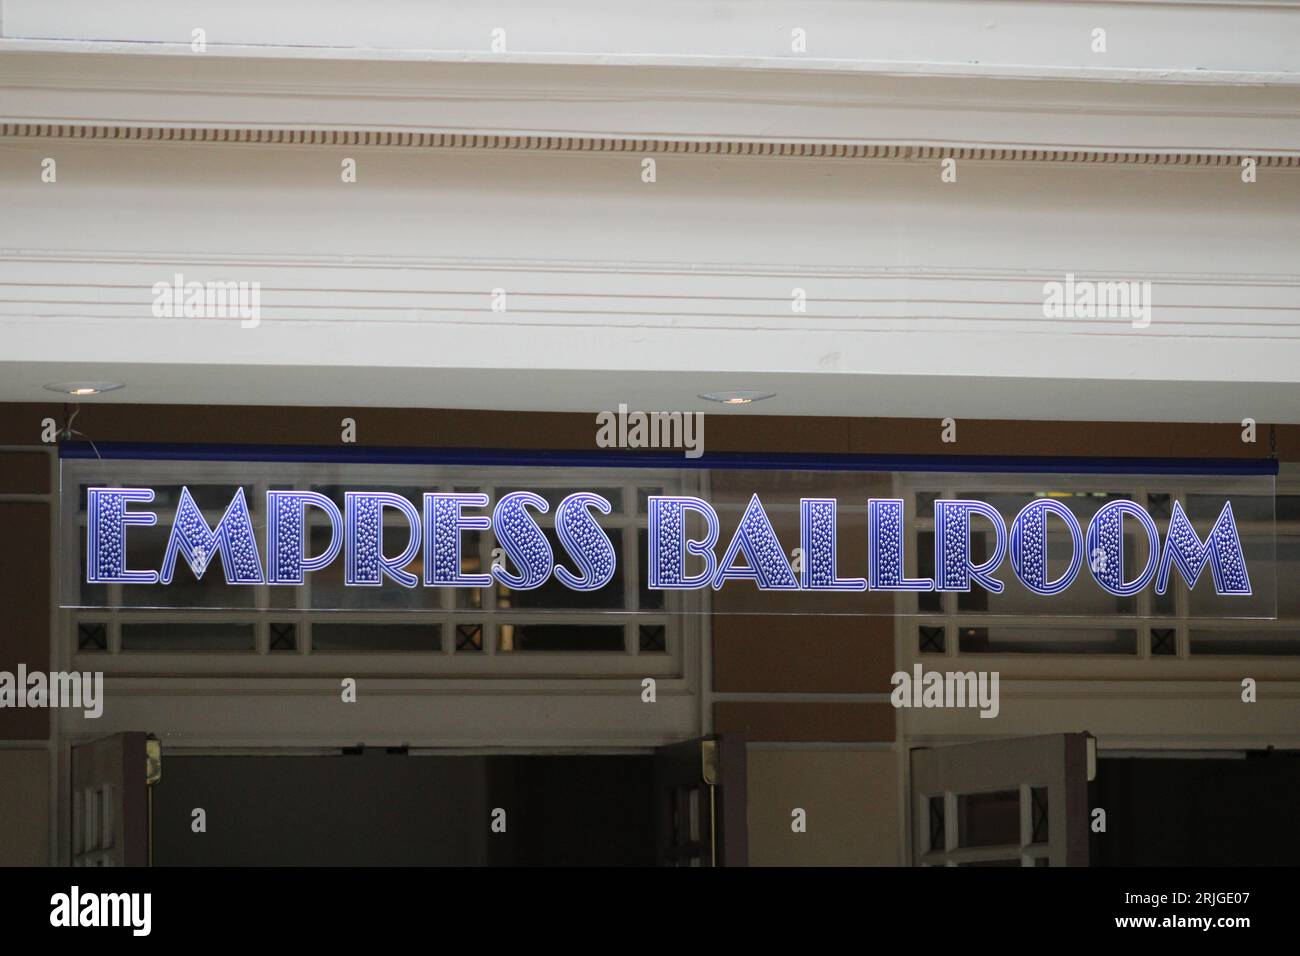 Art deco typeface blue sign for the Empress Ballroom in the Winter Gardens, Blackpool Stock Photo